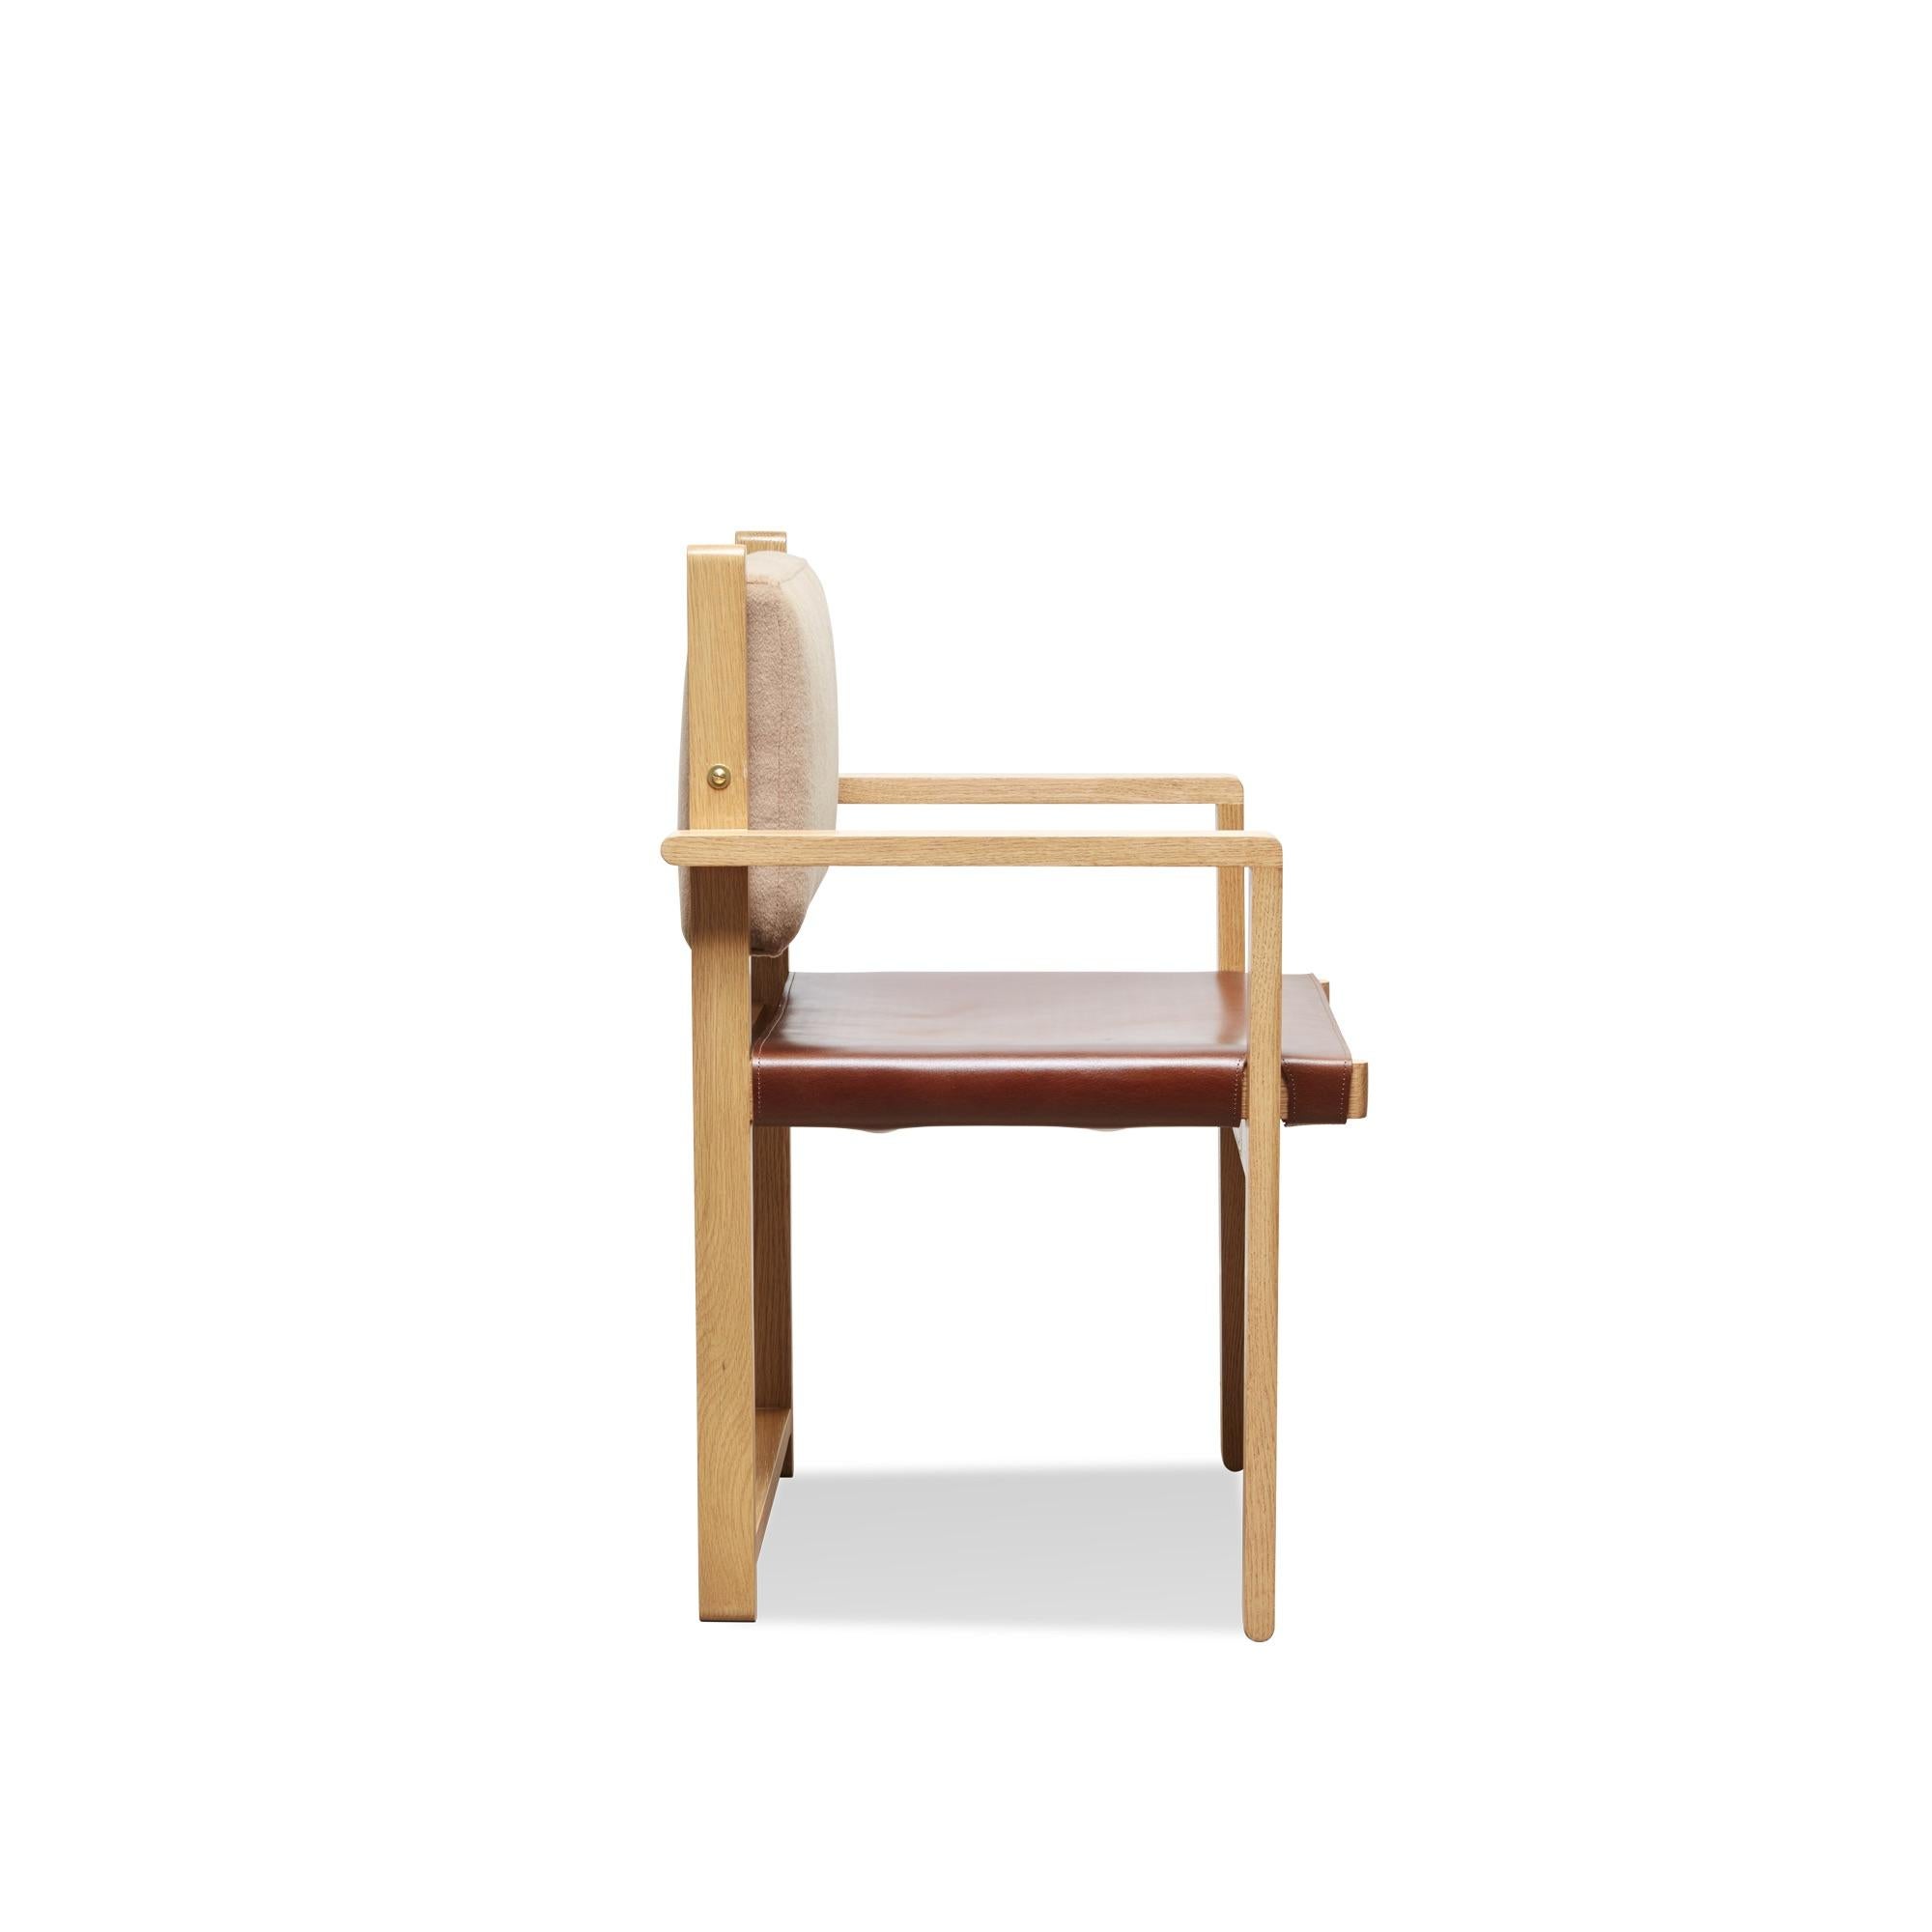 American Oak and Leather Morro Dining Chair by Lawson-Fenning